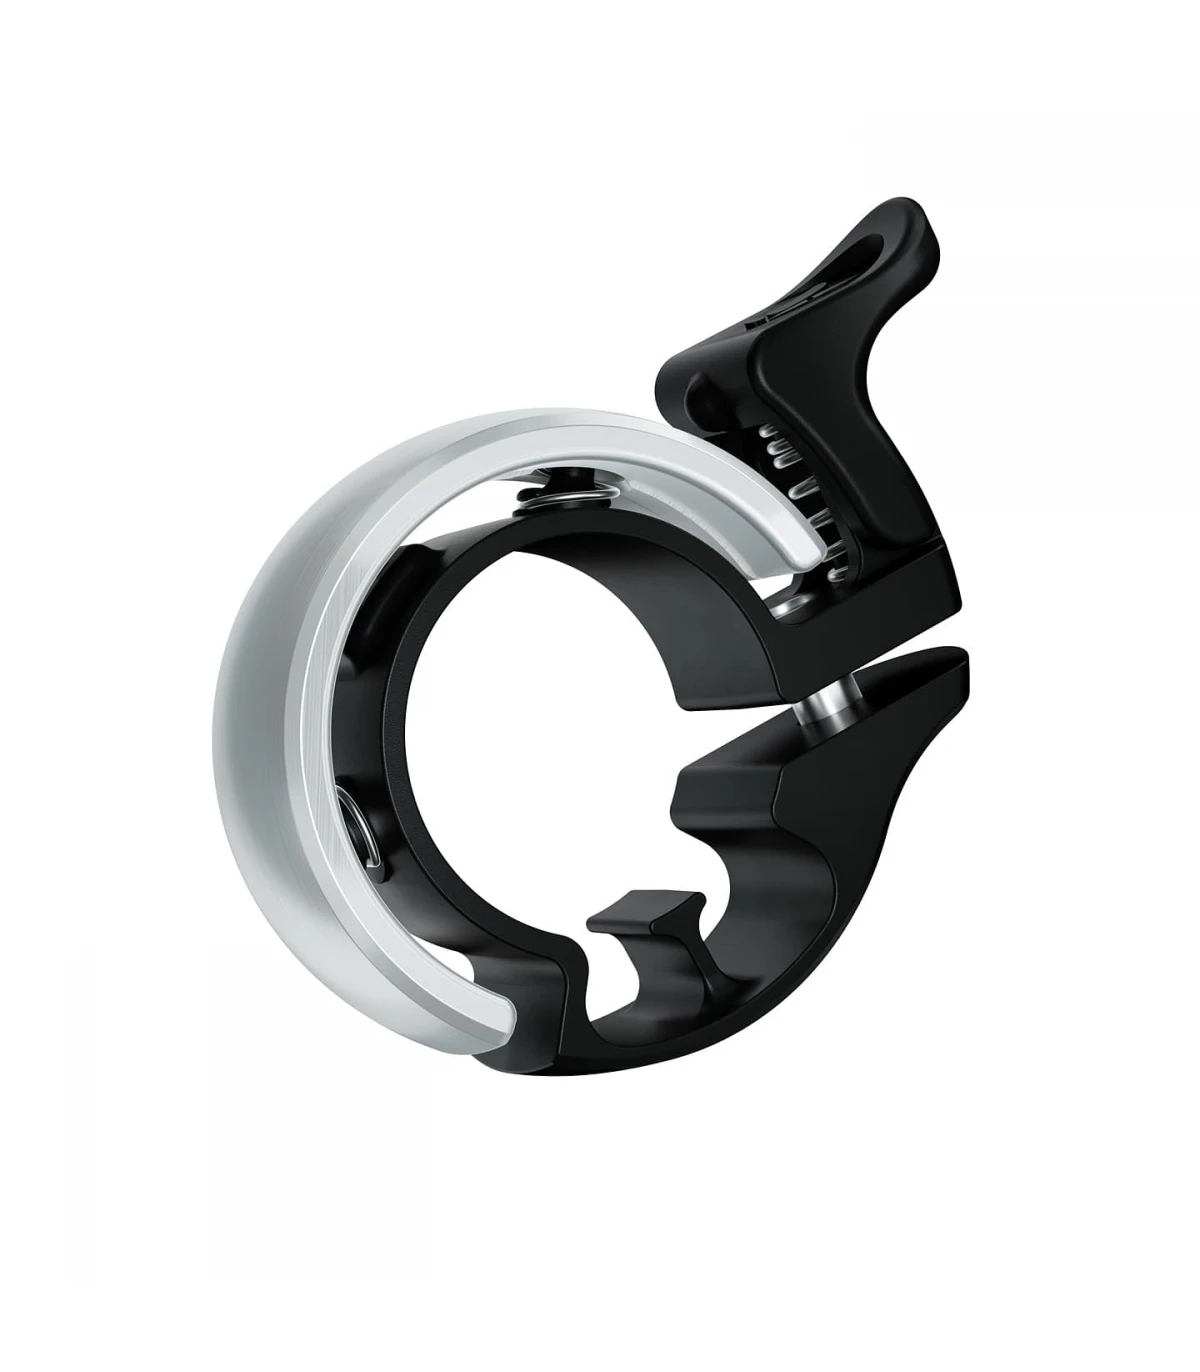 Cloche Knog Oi small 22.2mm pince noire